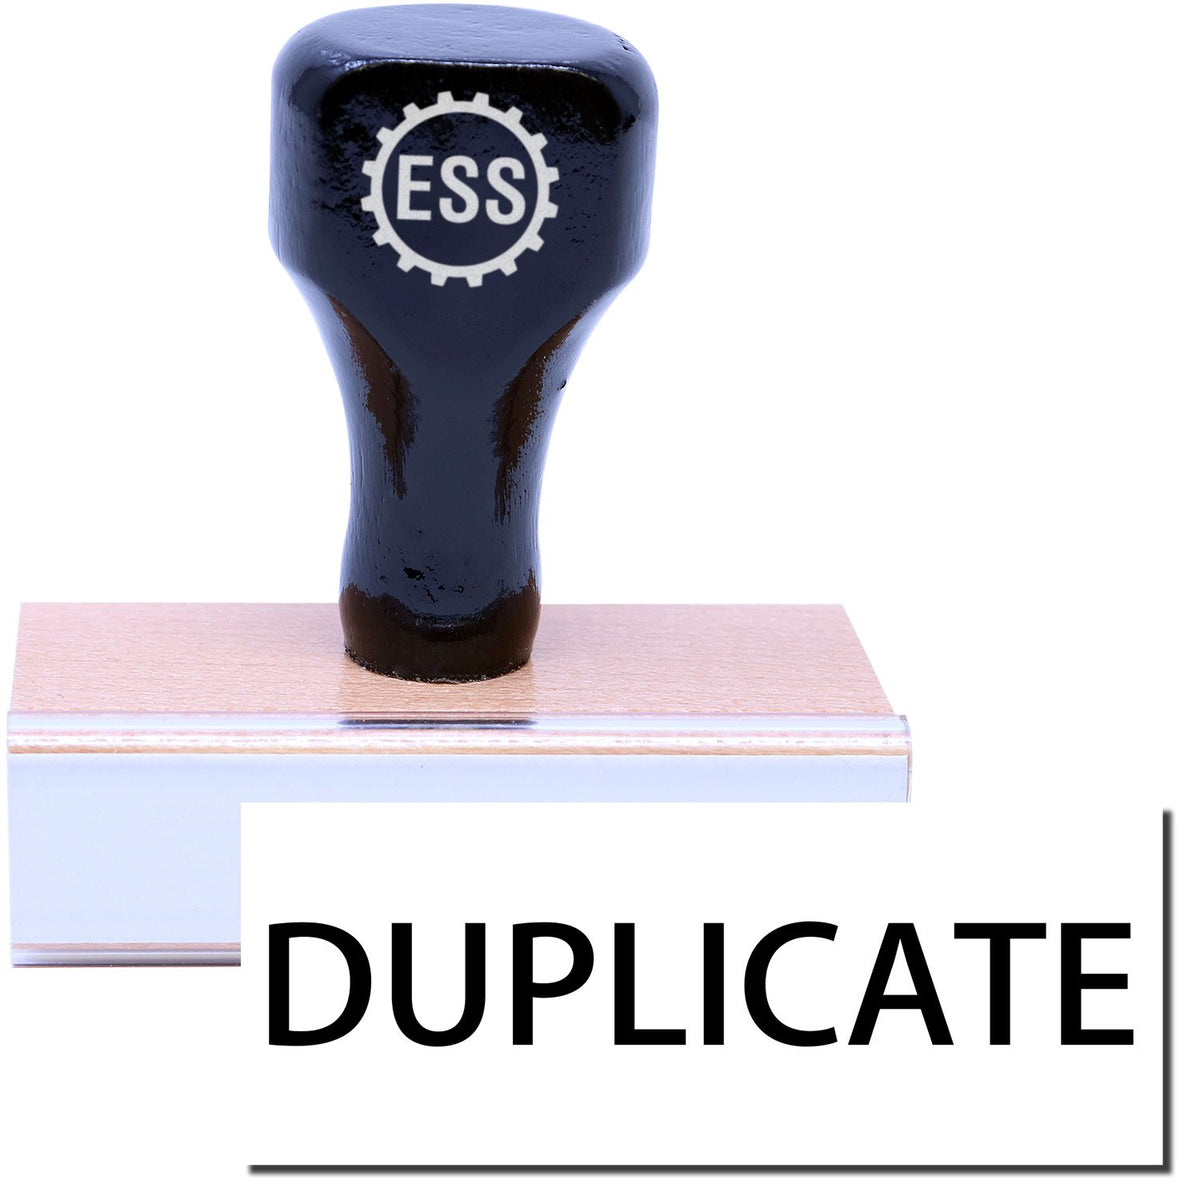 A stock office rubber stamp with a stamped image showing how the text &quot;DUPLICATE&quot; in a large font is displayed after stamping.